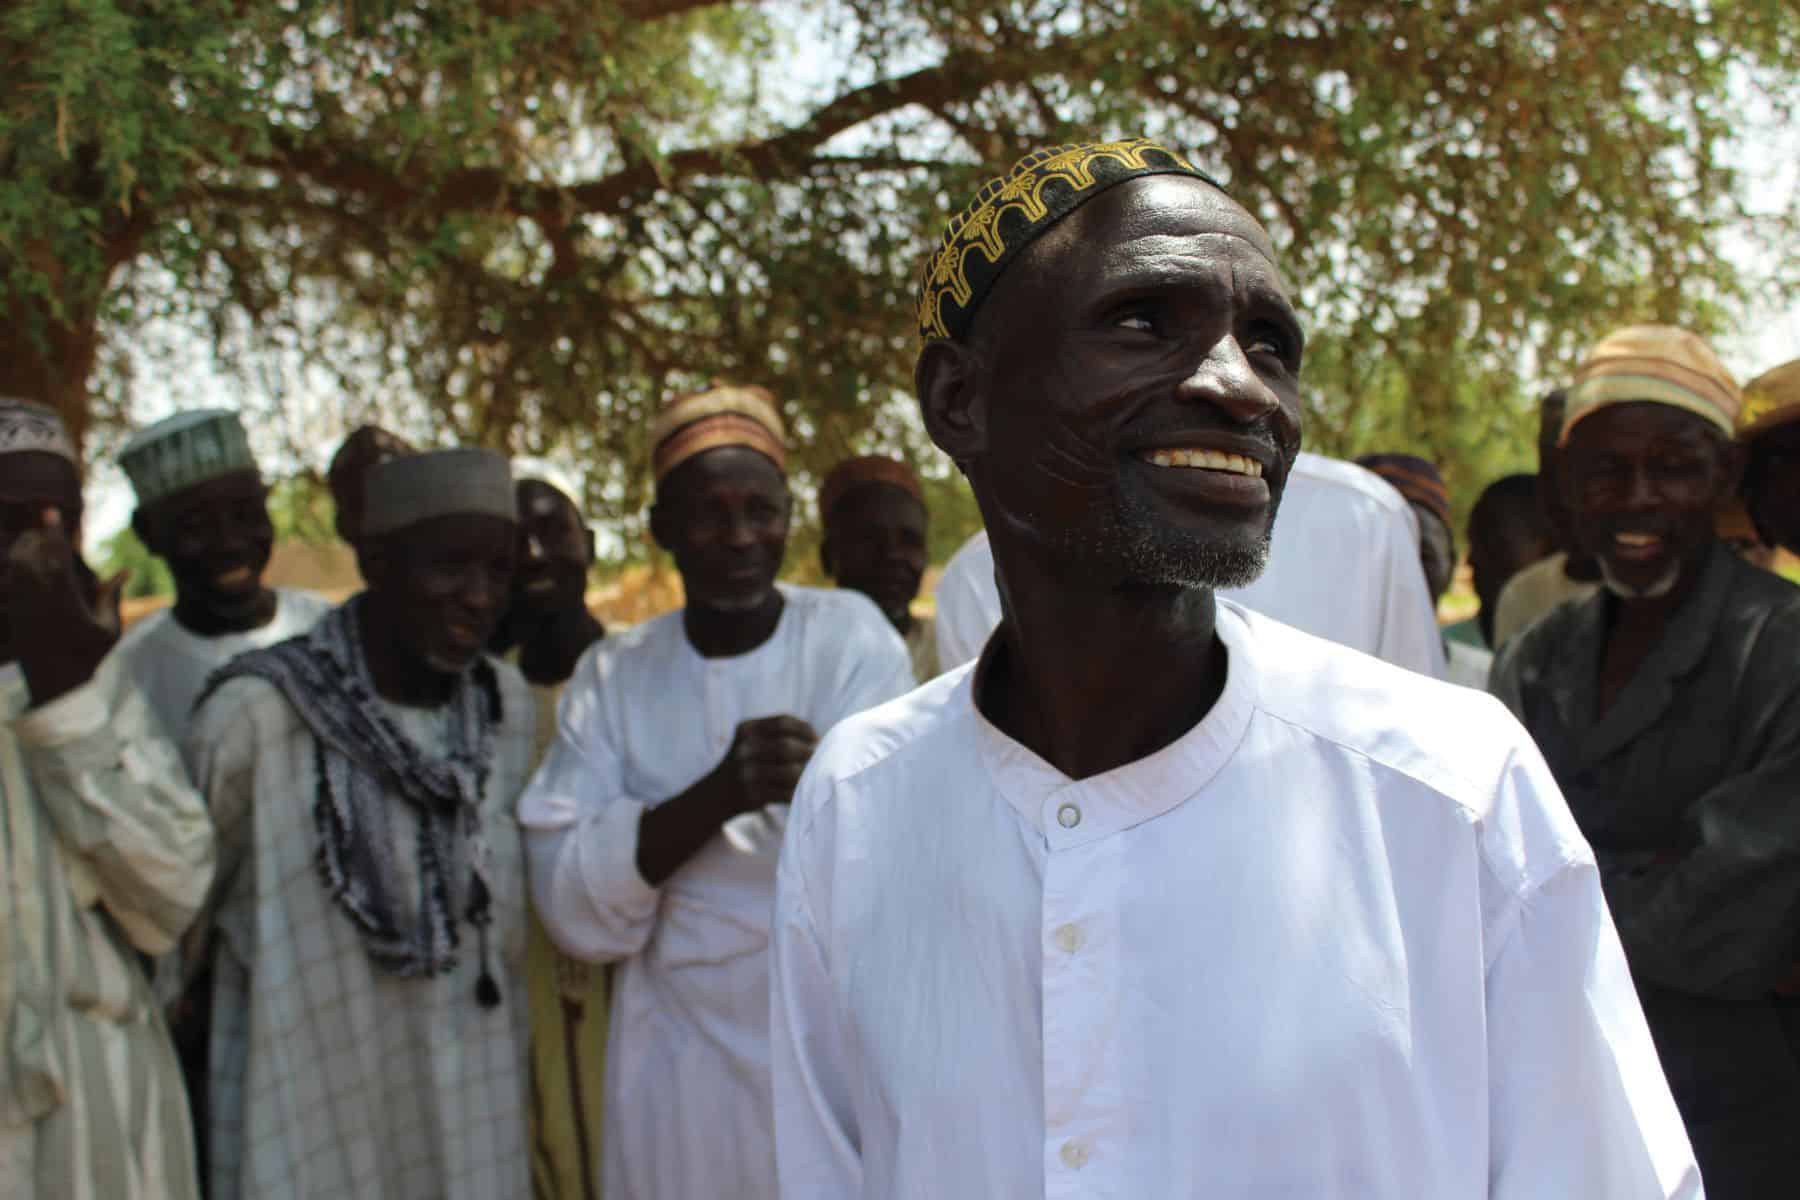 Zakari Yao is filled with joy over the transformed crops in his community.